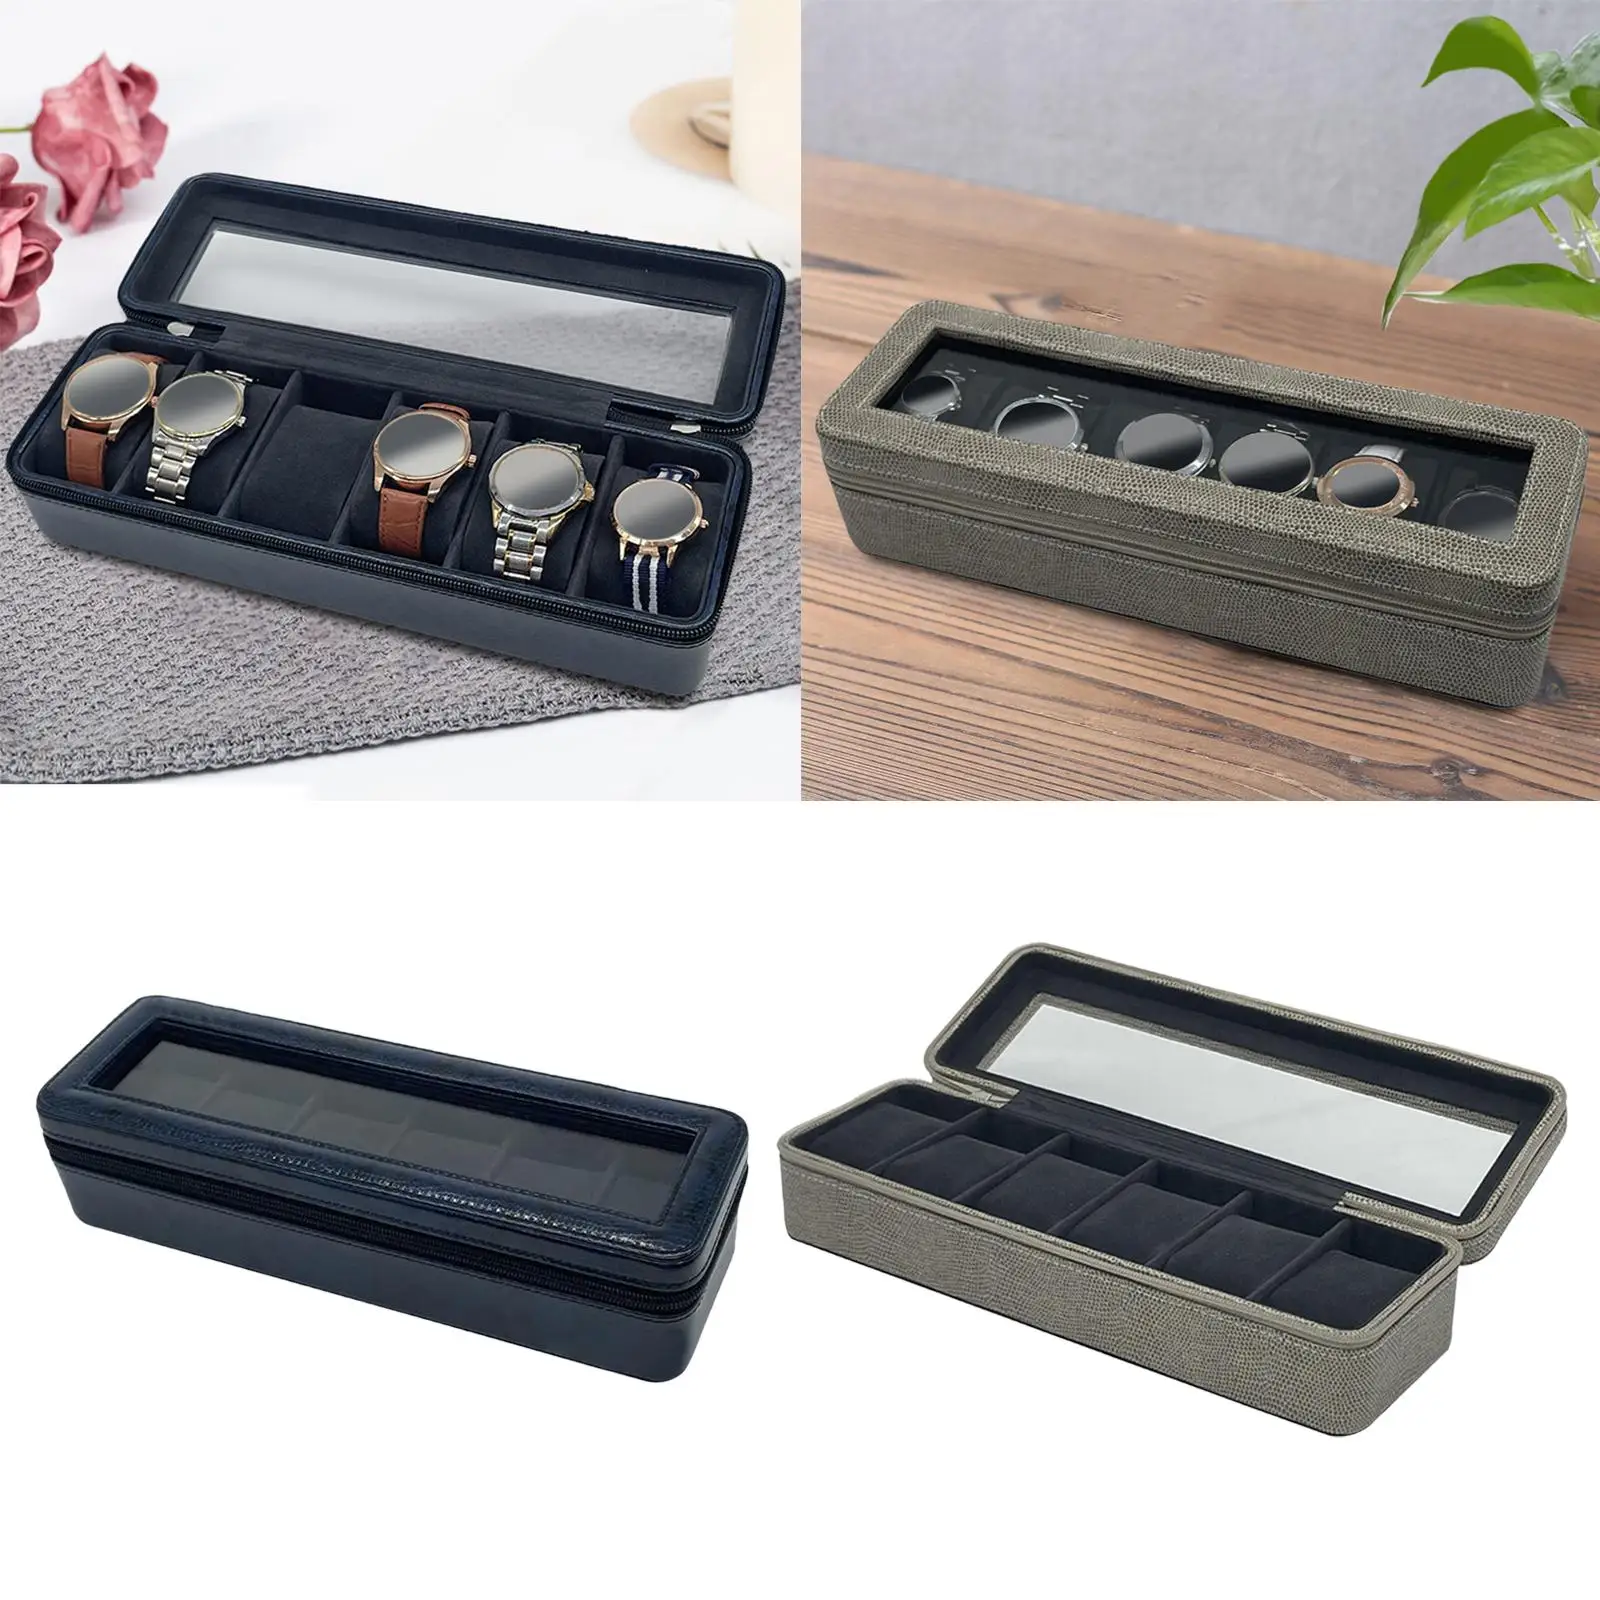 Watch Box Storage Boxes 6 Slot Showcase with Lid Display Case Holder Jewelry Storage Organizer Dustproof Large for Men and Women